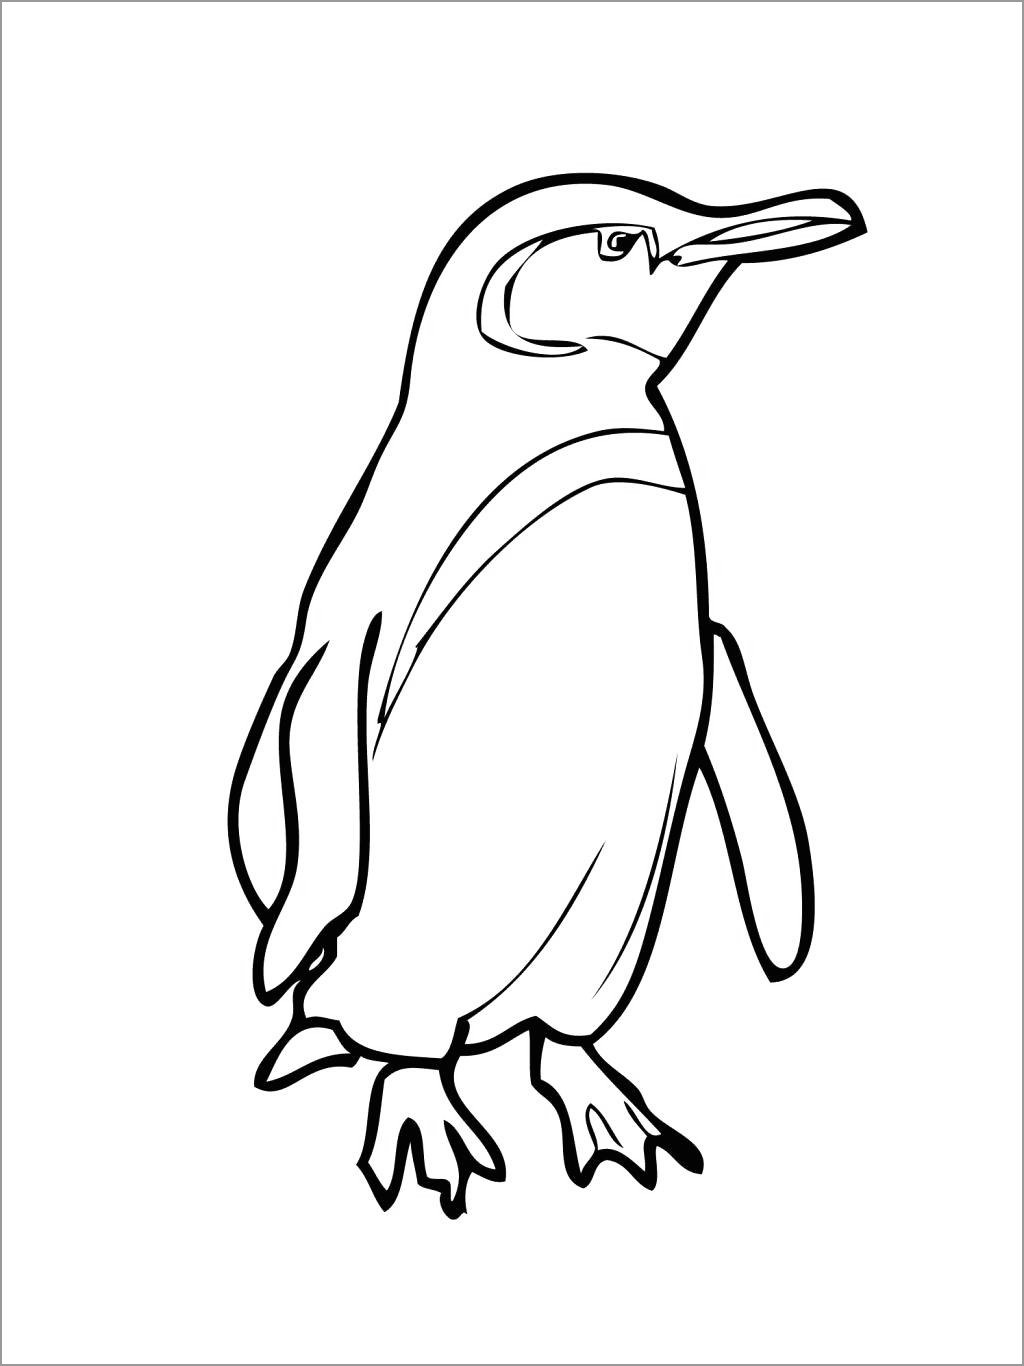 Coloring Page Of A Penguin - ColoringBay